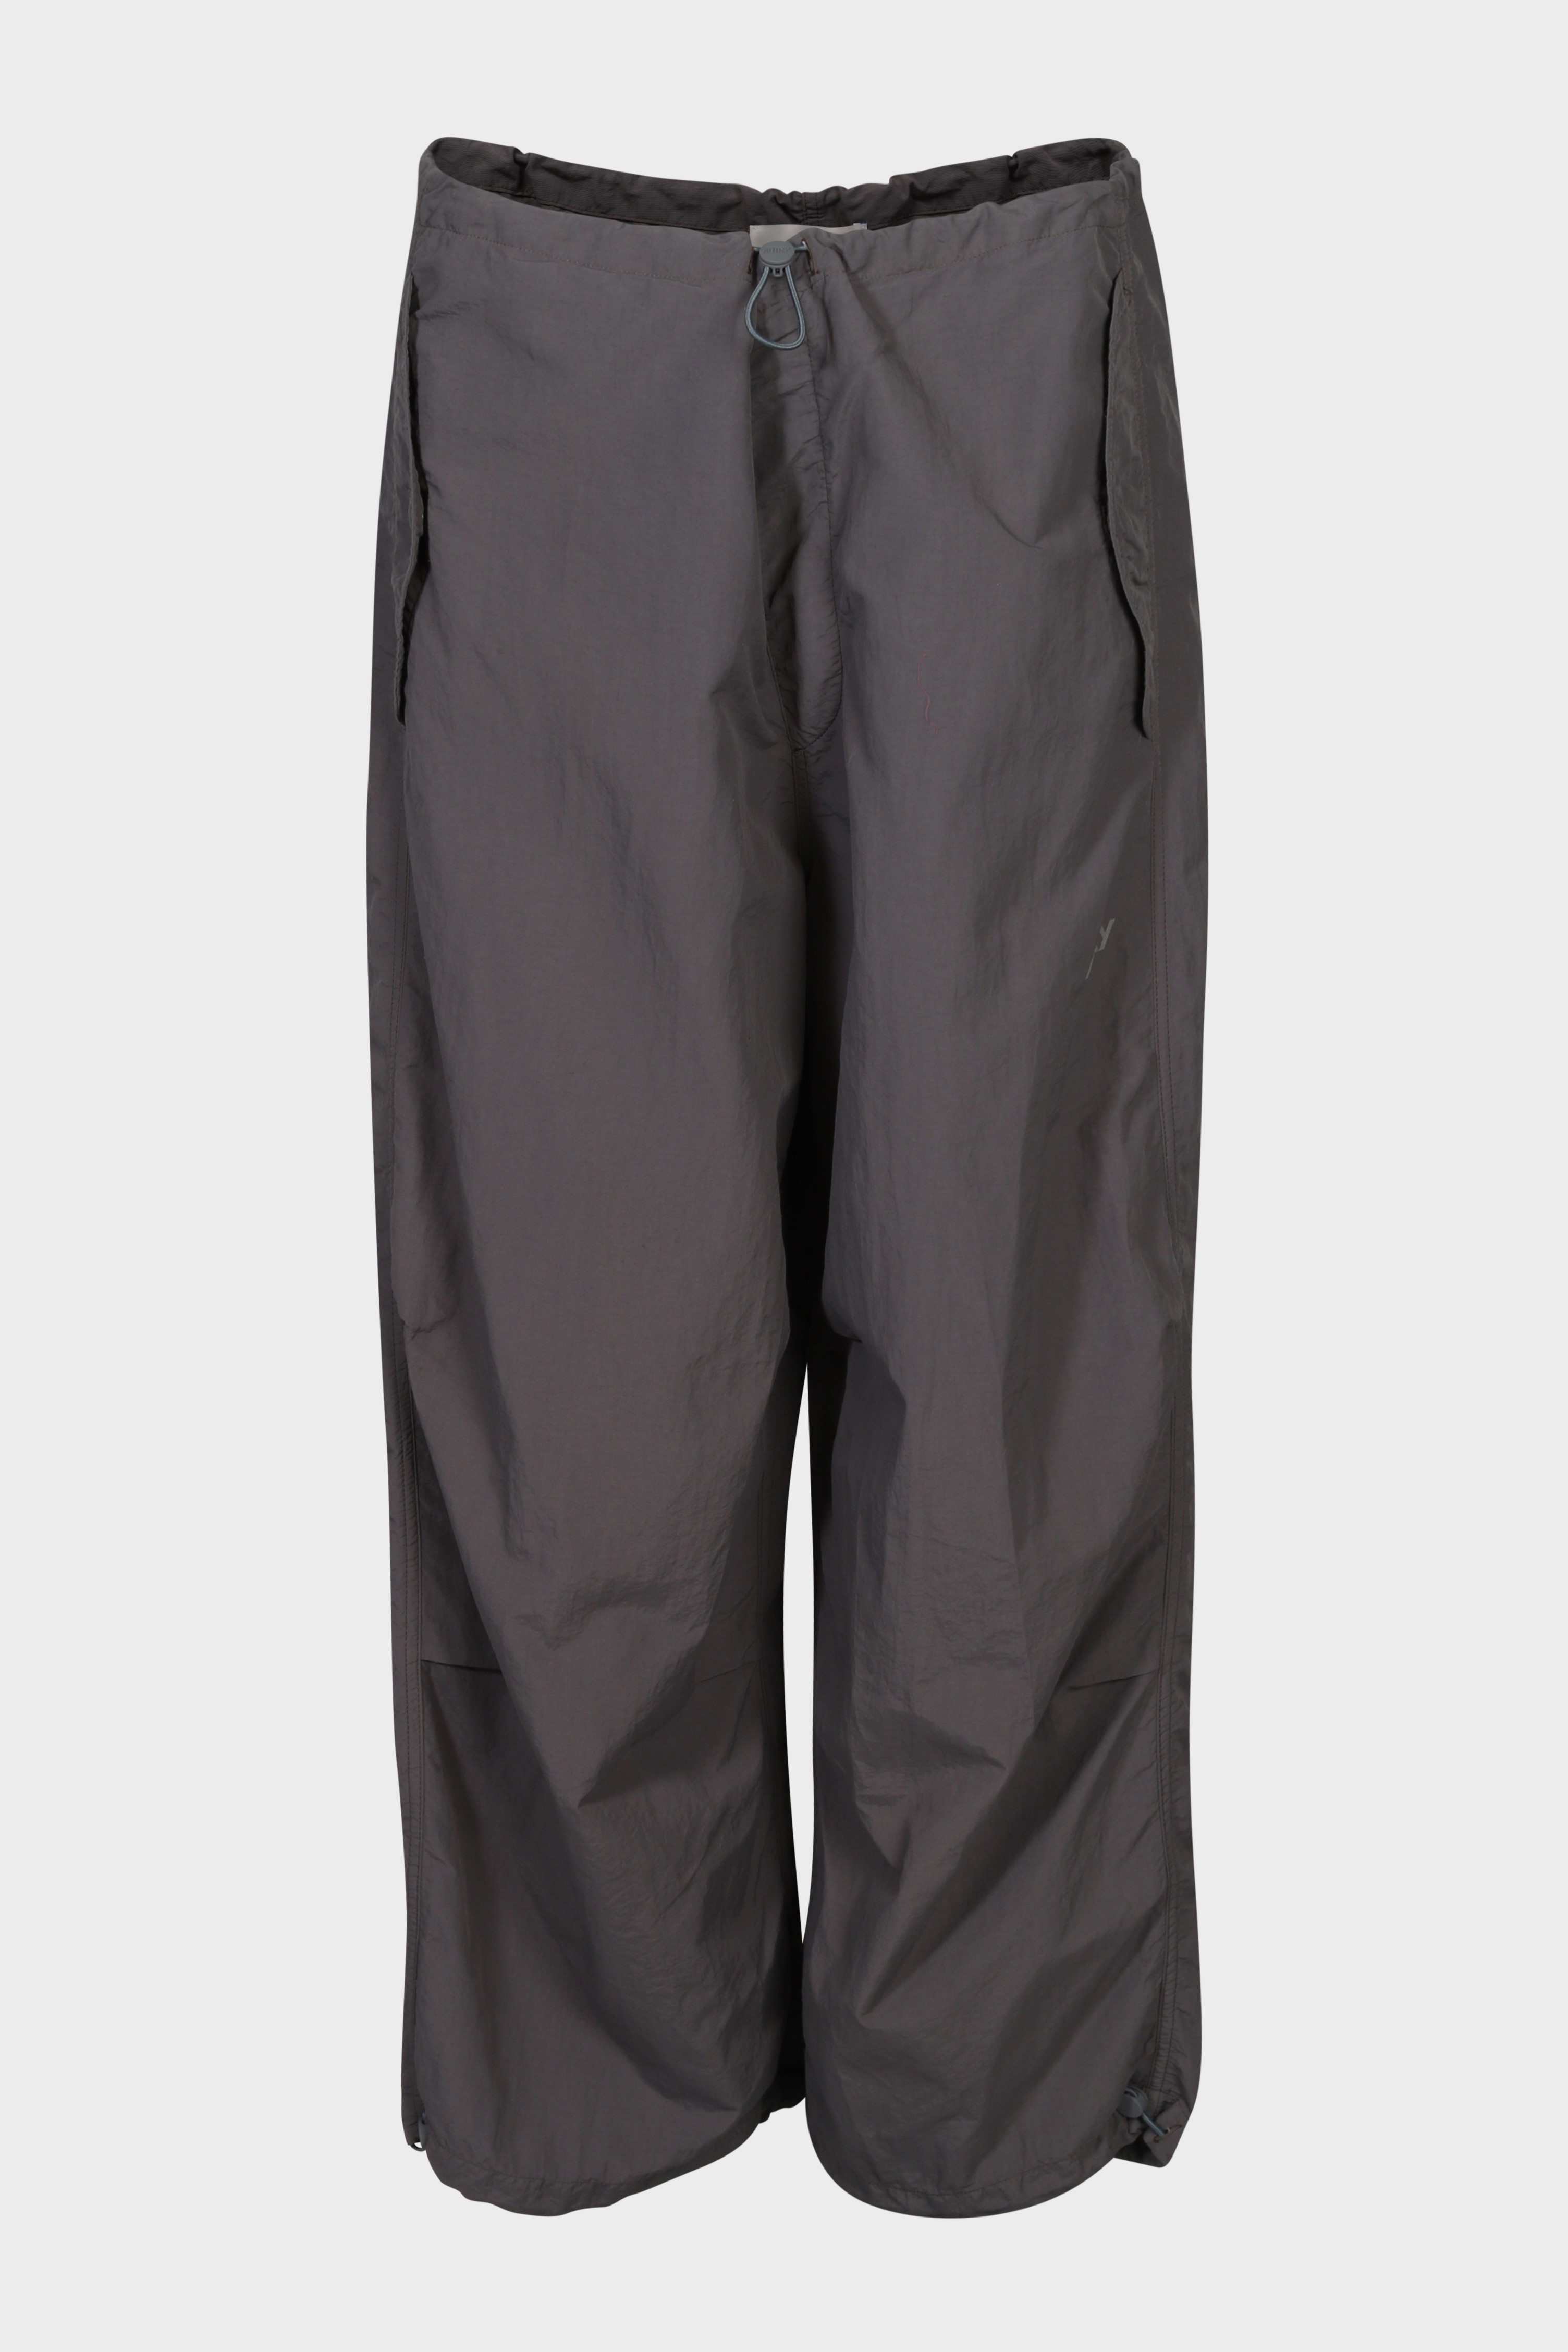 AUTRY ACTION SHOES Wide Leg Nylon Pant in Stone